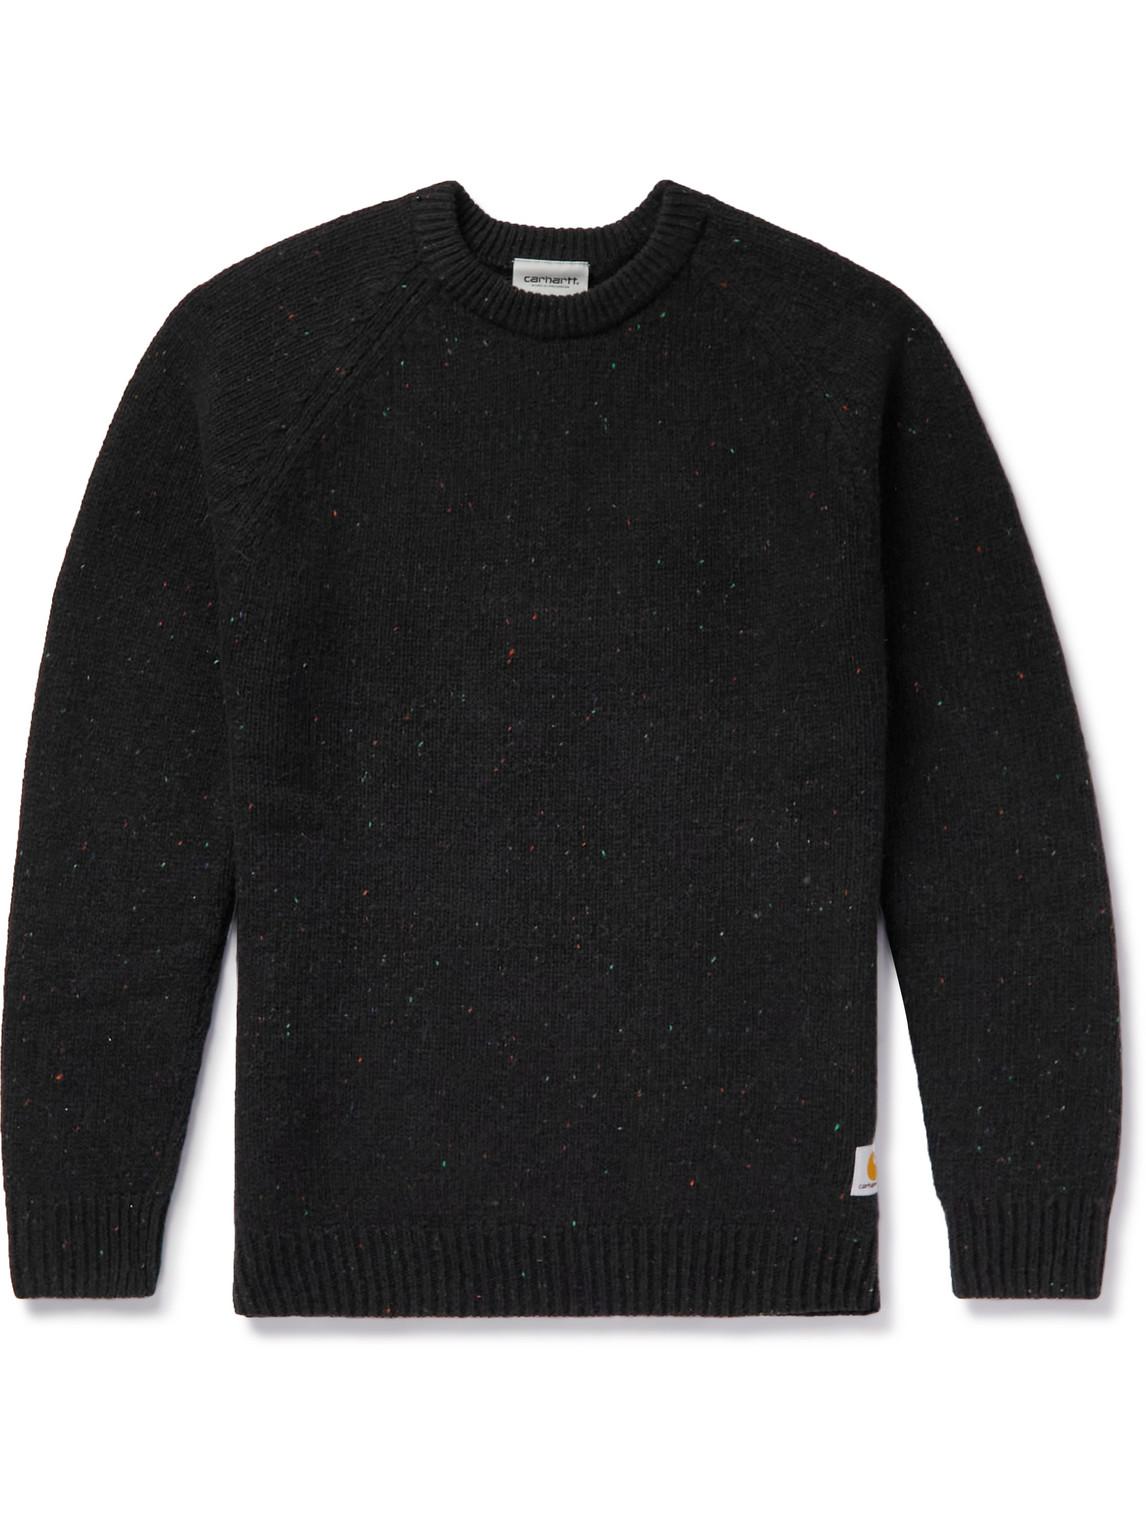 Carhartt WIP Anglistic Wool-blend Sweater in Black for Men | Lyst